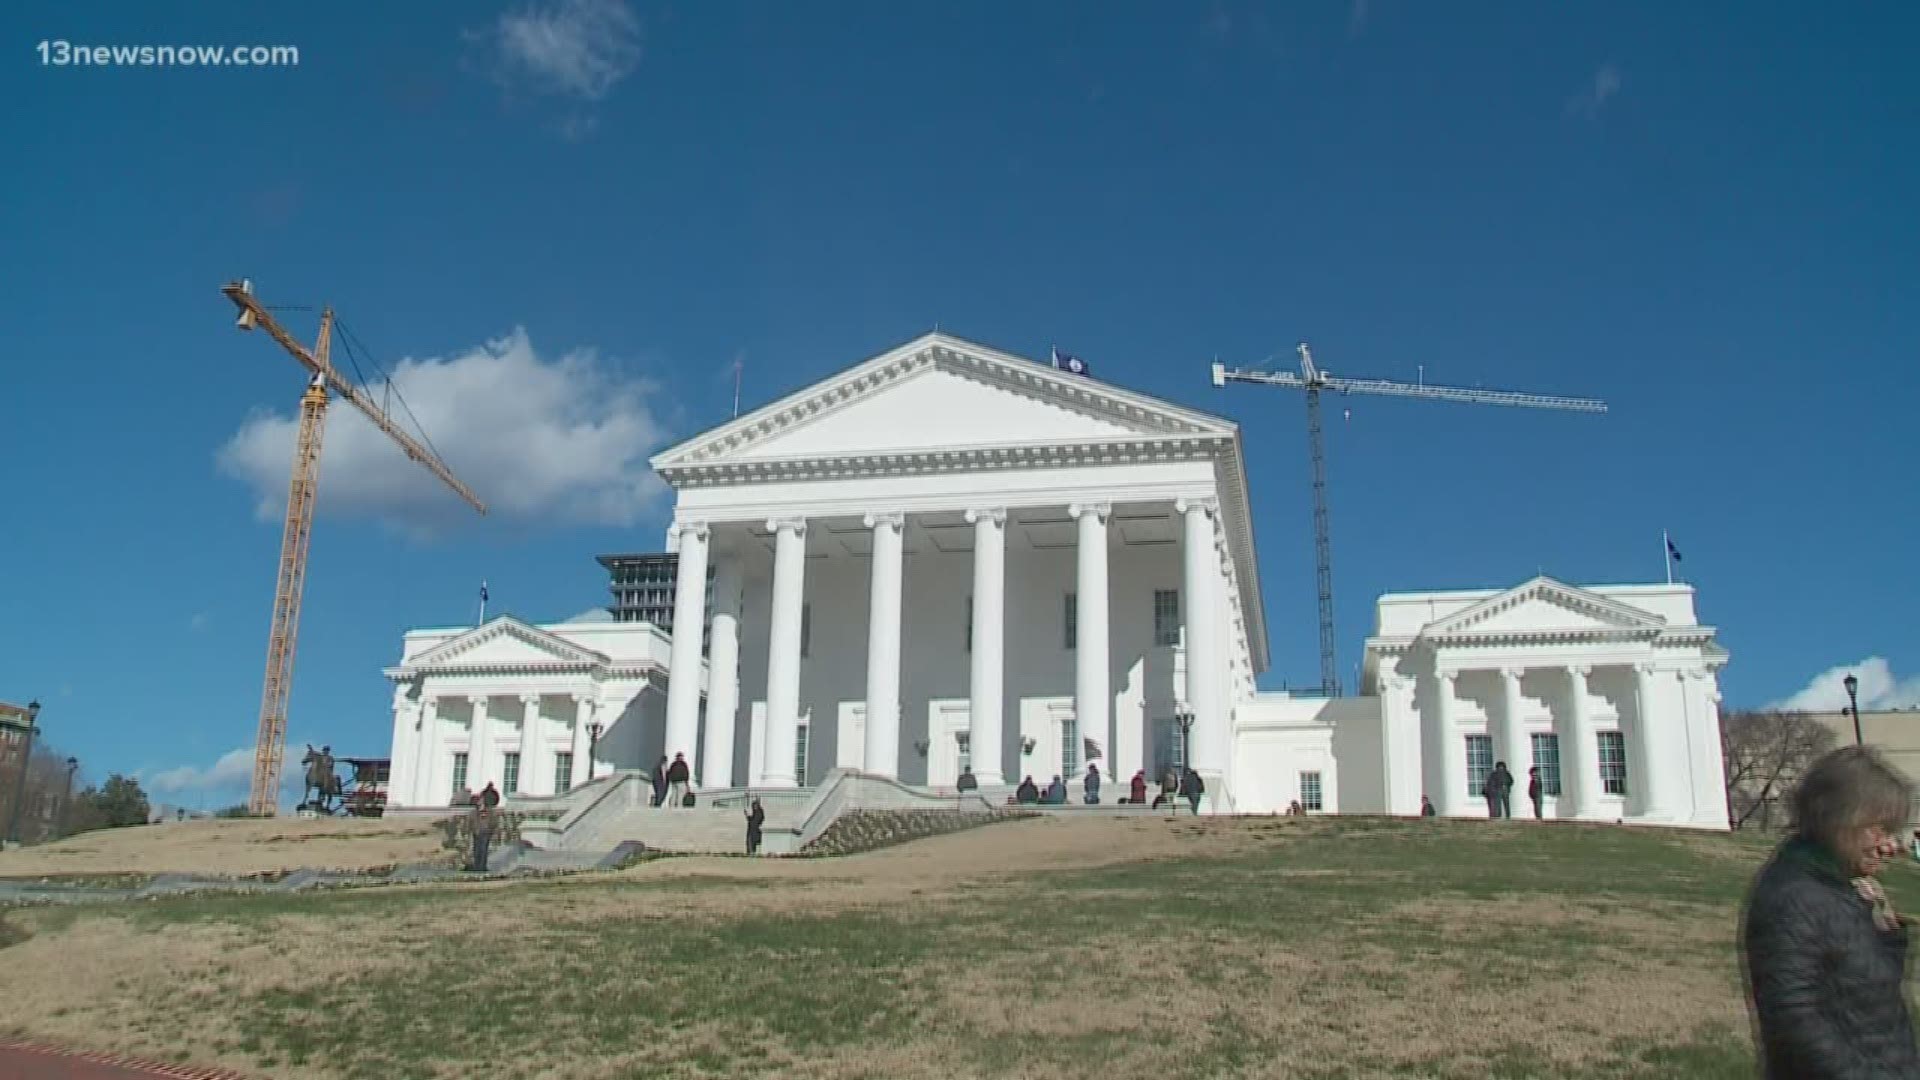 13News Now Allison Bazzle spoke to some organizations that plan to attend the gun rights rally in Richmond.